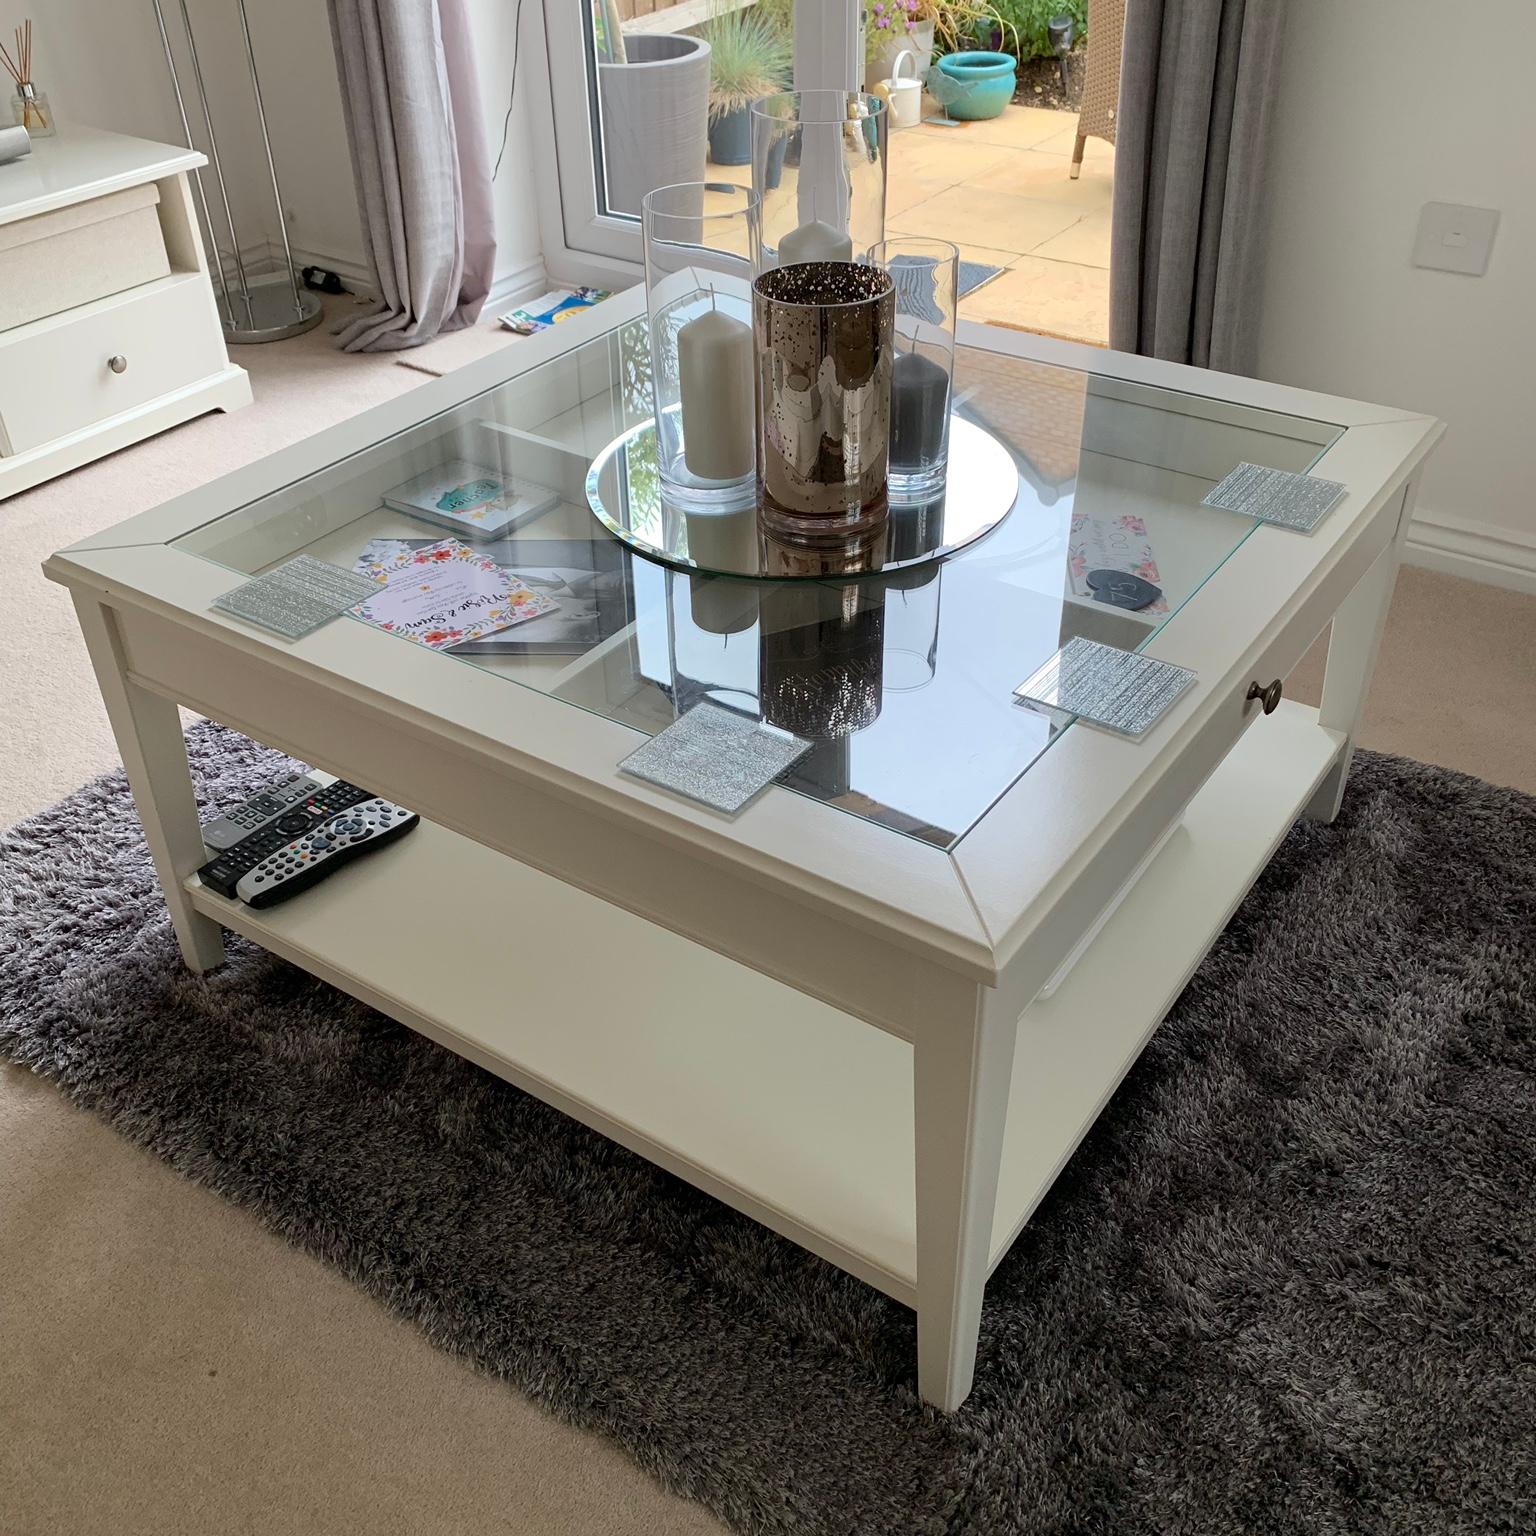 Ikea Liatorp Coffee Table - White / Glass in Madeley for £ ...